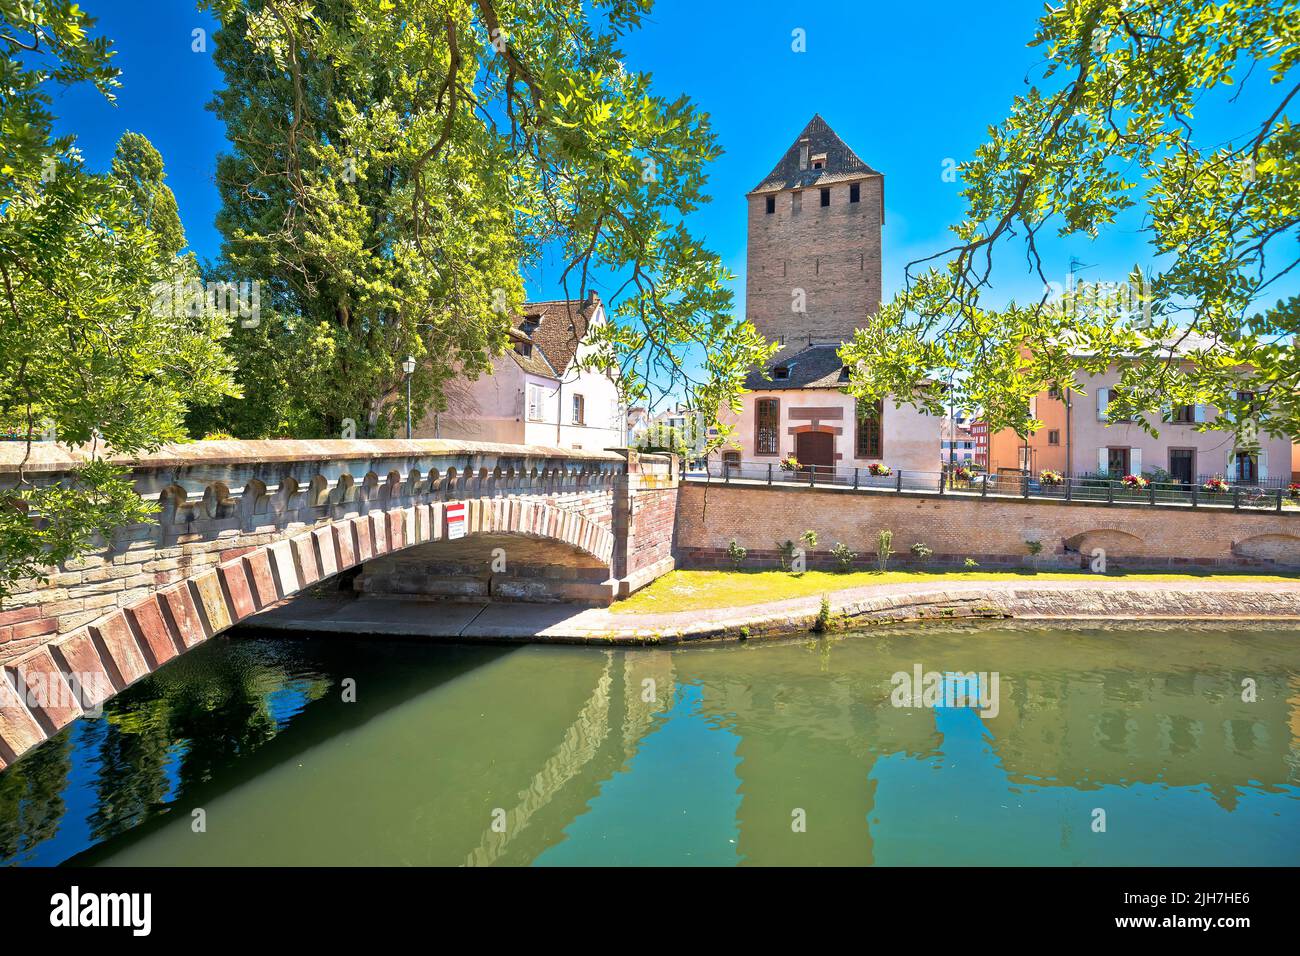 Town of Strasbourg canal and architecture colorful view, Alsace region of France Stock Photo